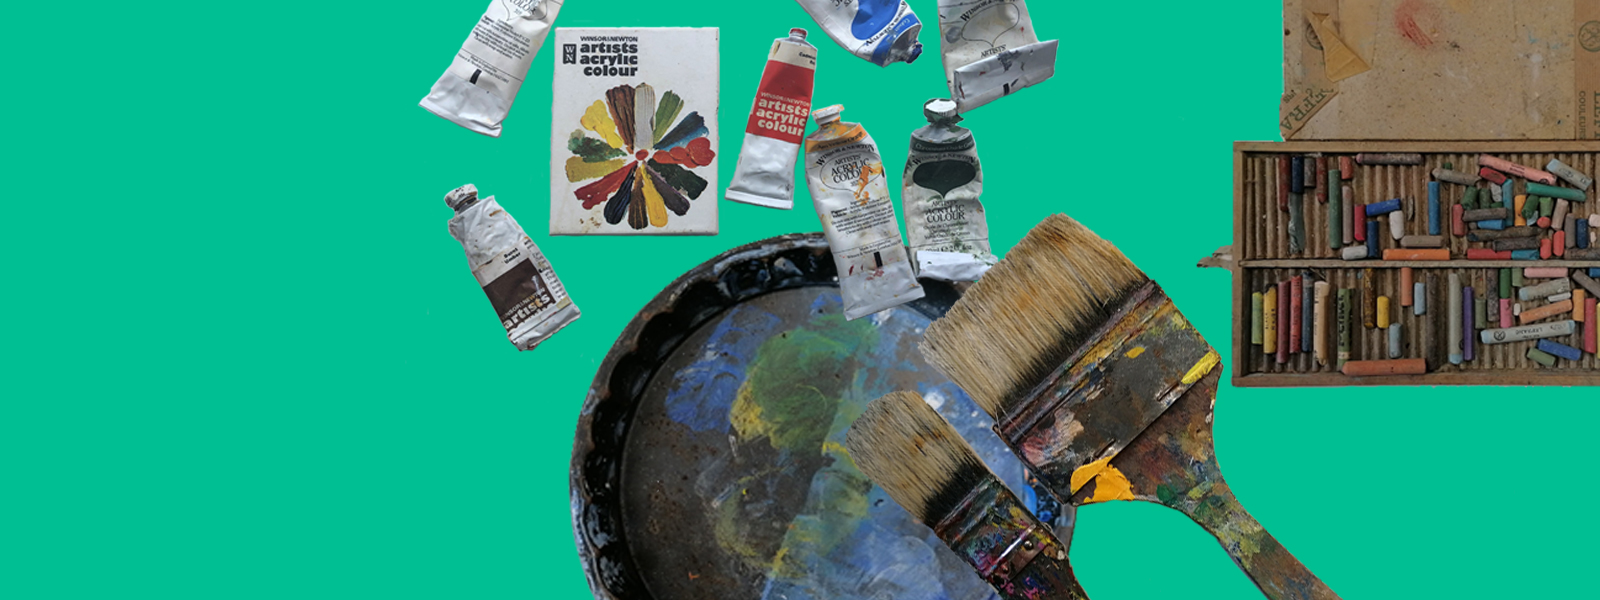 A selection of art materials on an emerald background including tubes of artists acrylic colour and their box, a cake pan with blue and green paint mixed, two wide paintbrushes and a box of pastels.